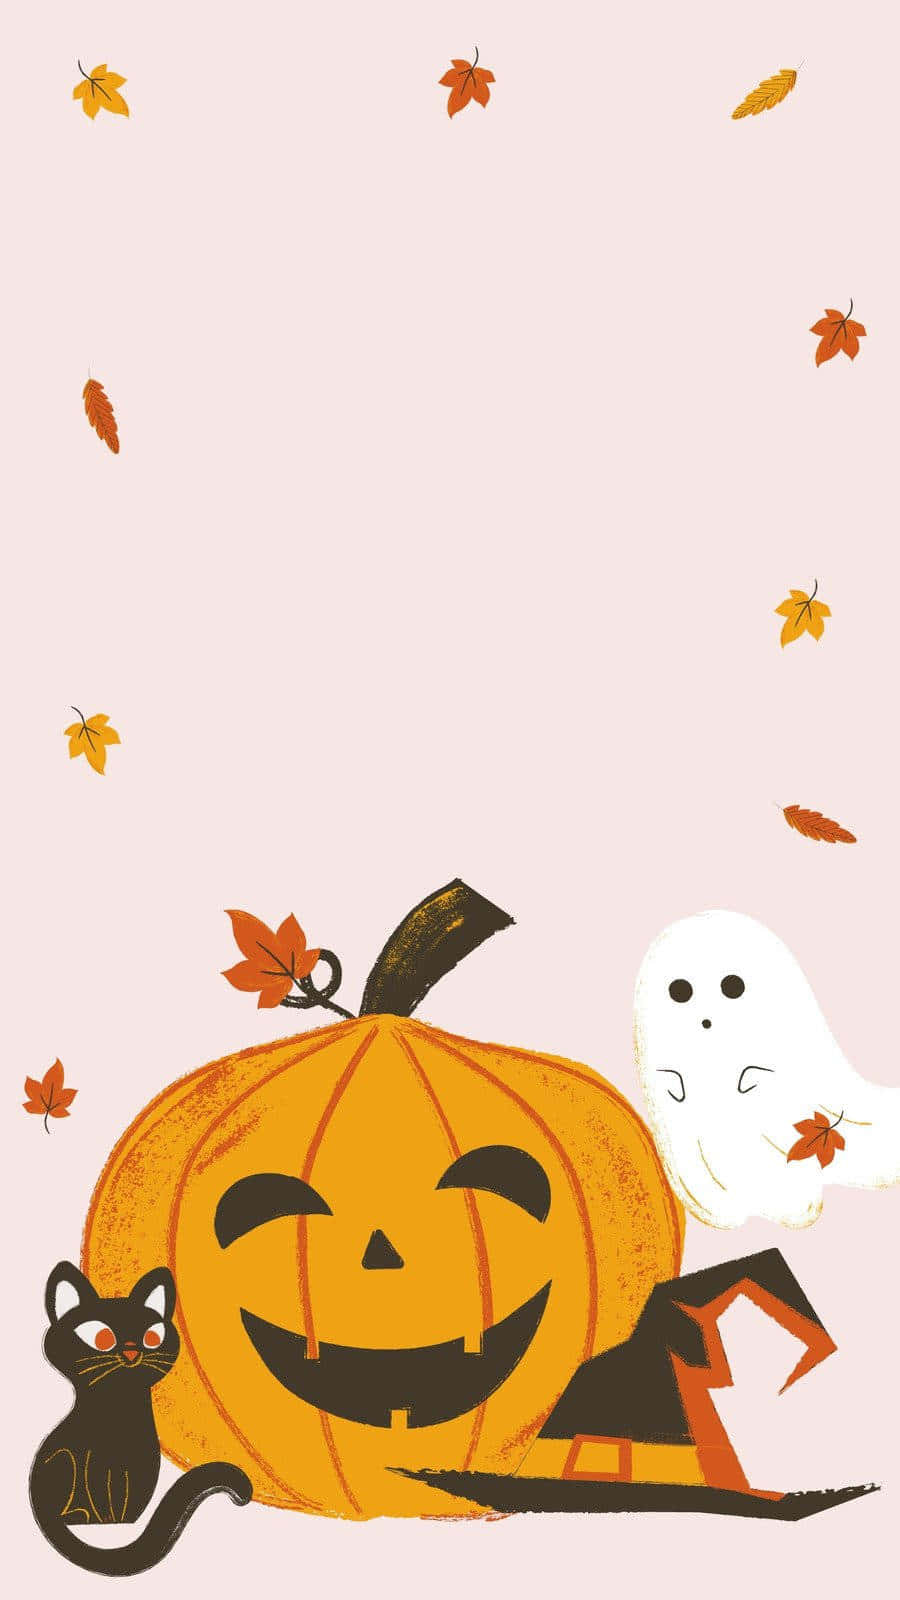 Get Into The Halloween Spirit With These Adorable Iphone Wallpapers